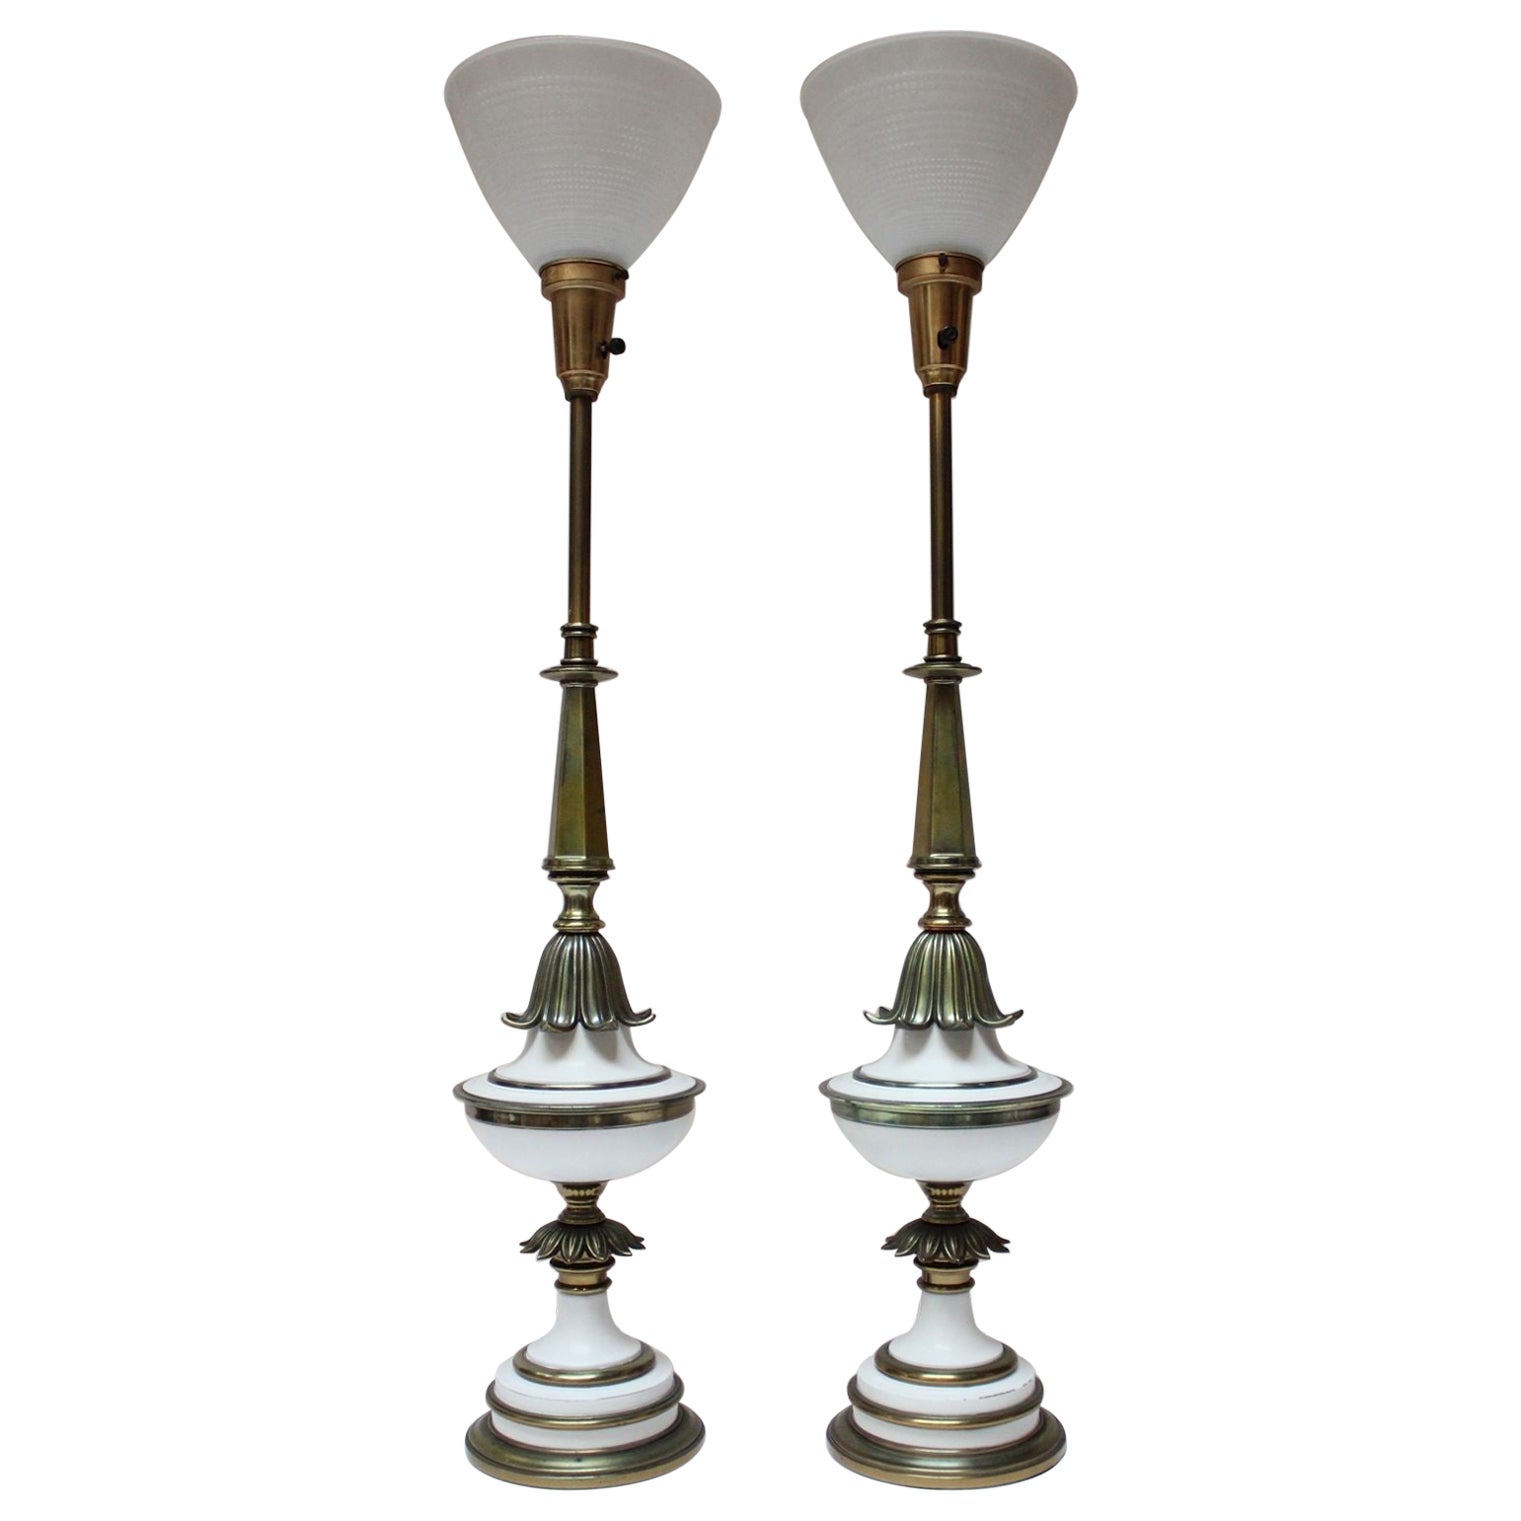 Pair of Hollywood Regency-Style Brass and Glass Stiffel Table Lamps